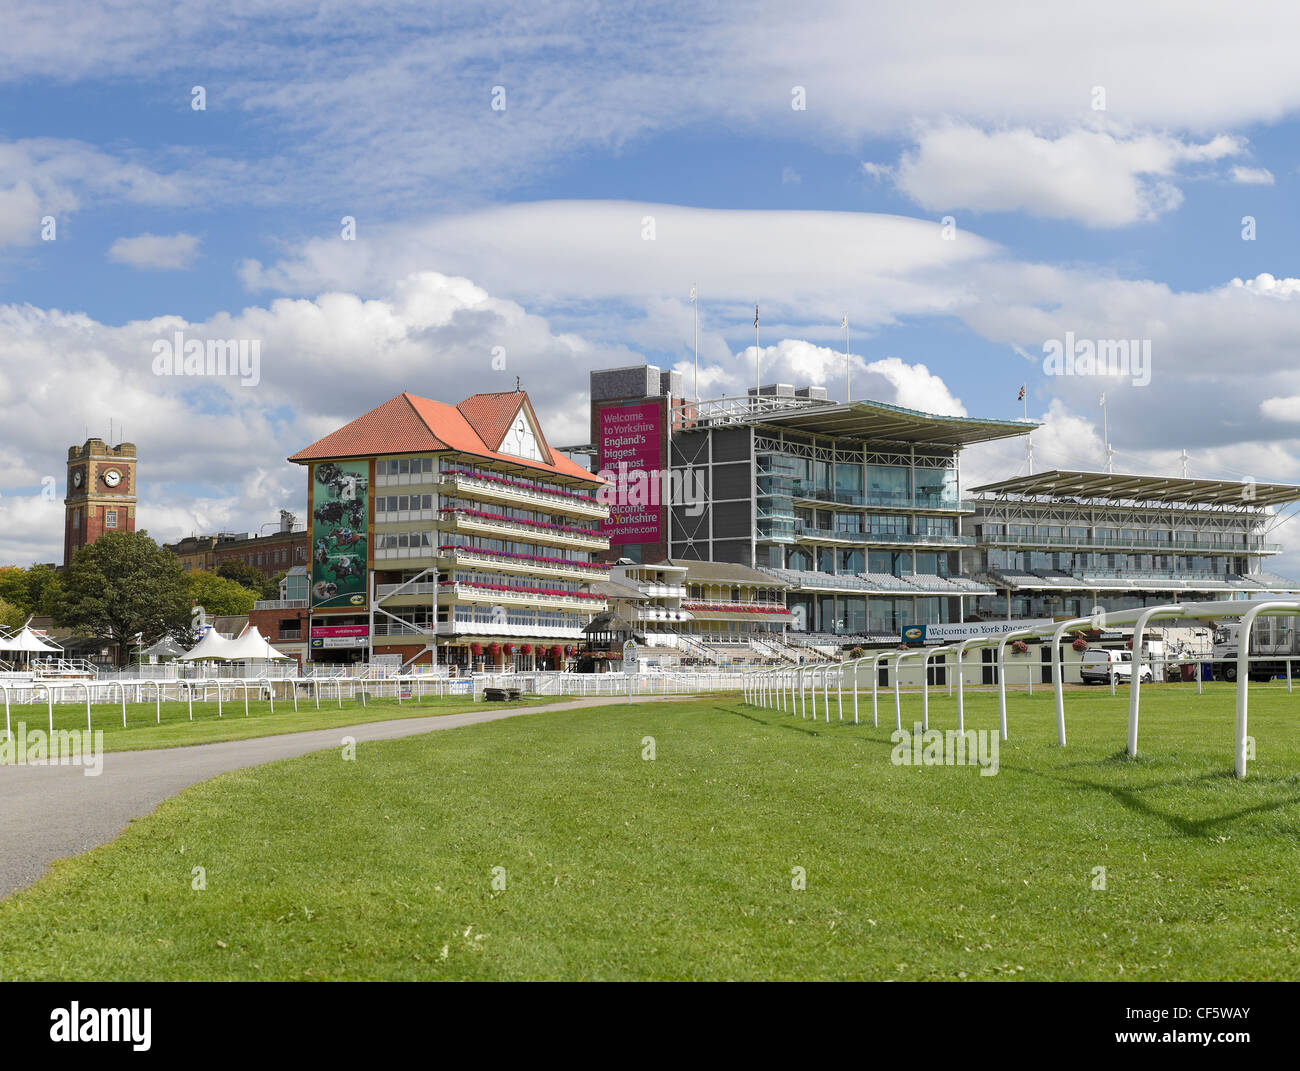 York Racecourse and Terrys Chocolate factory in the background. Stock Photo